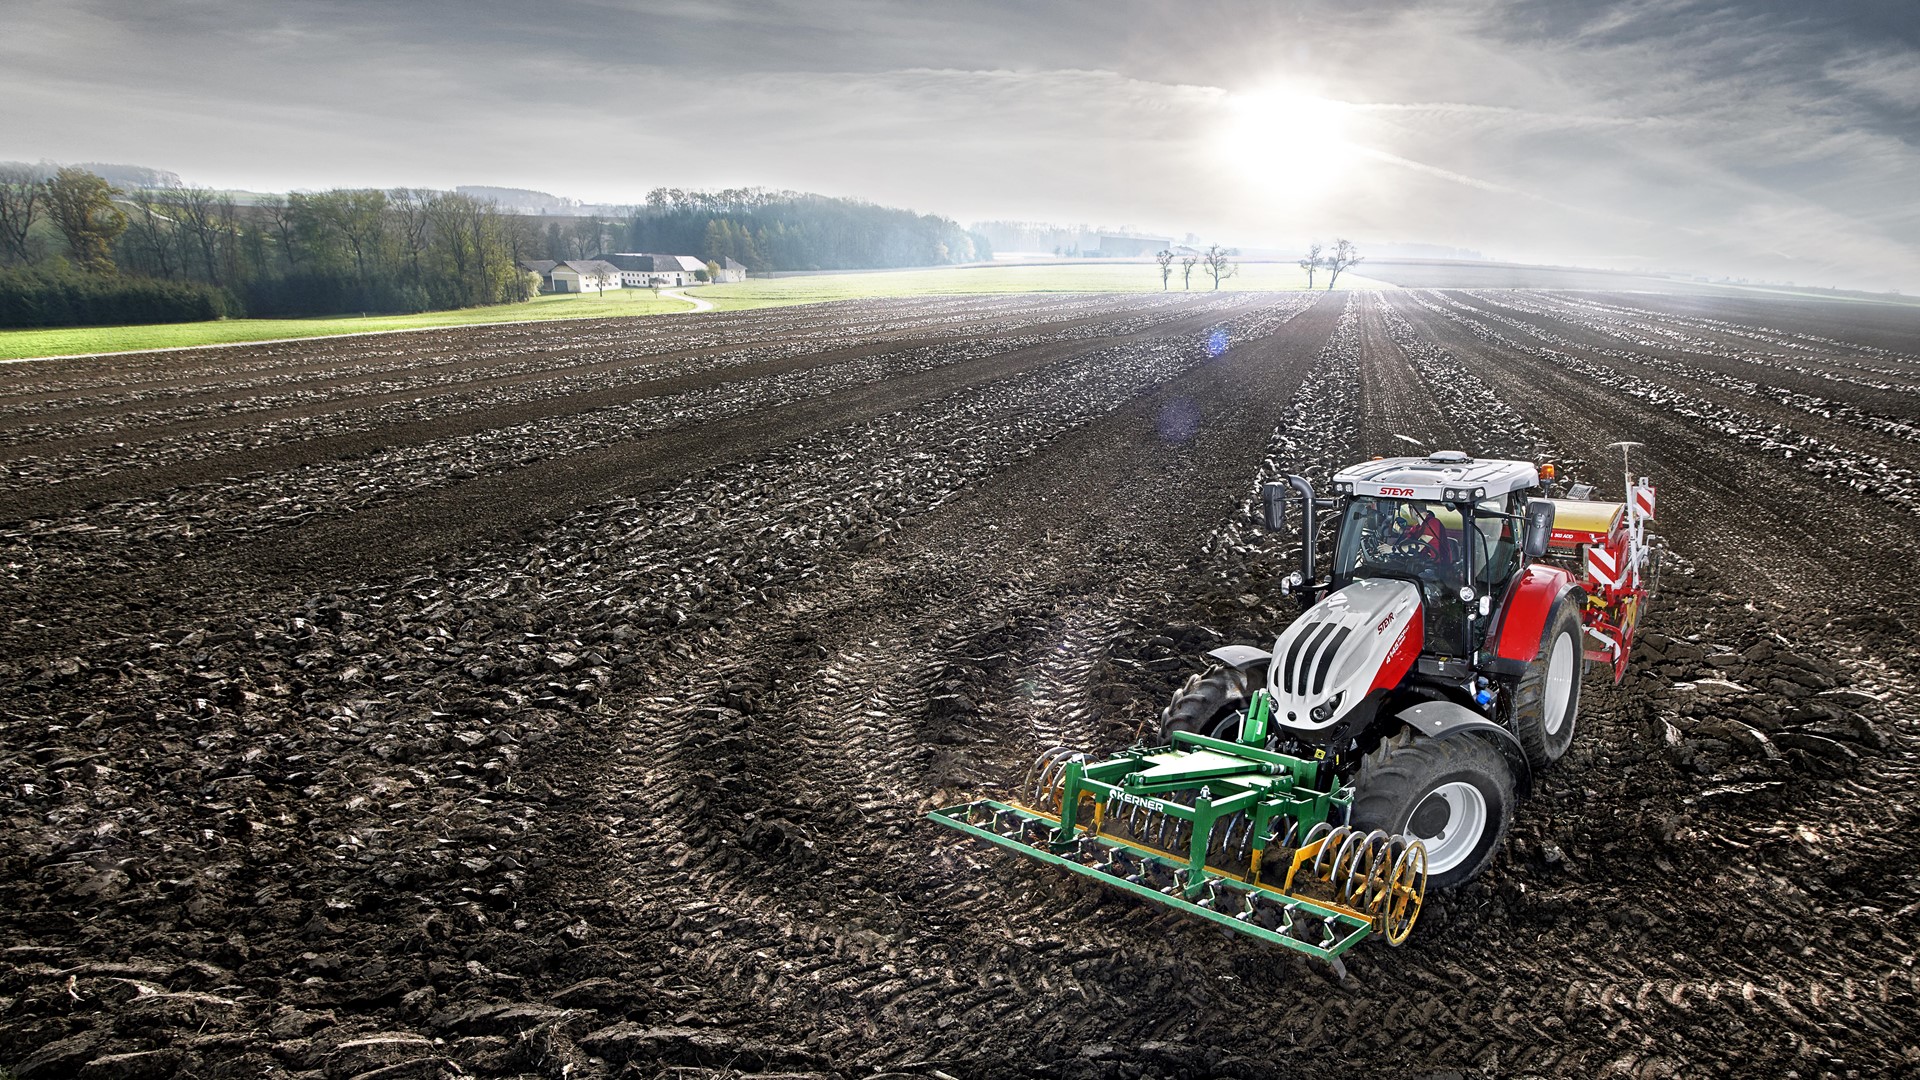 STEYR will be exhibiting a substantial update for its S-Tech solutions at Agraria 2016